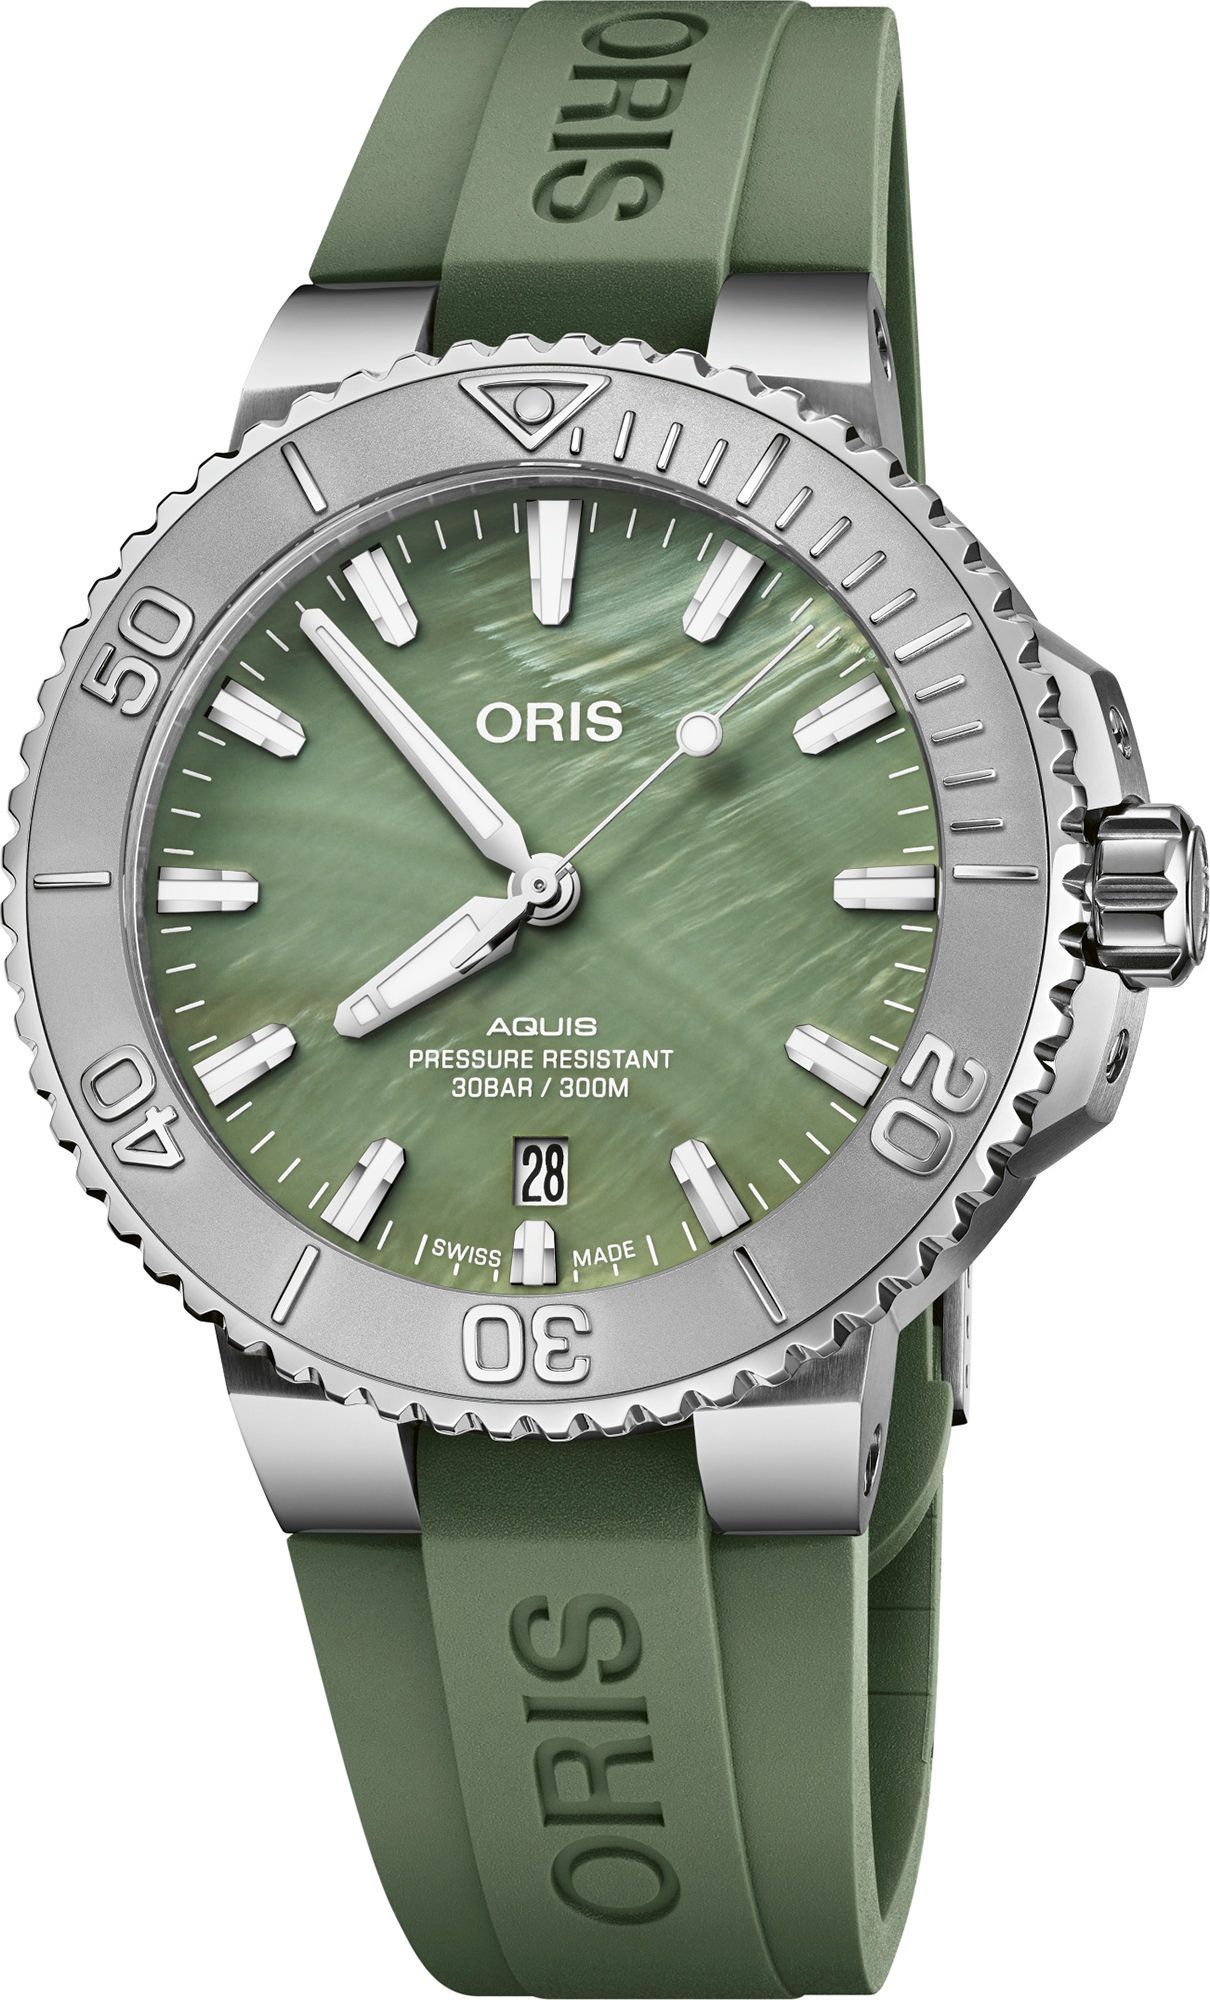 Oris Aquis New York Harbor Limited Edition Green MOP Dial 41.5 mm Automatic Watch For Men - 1